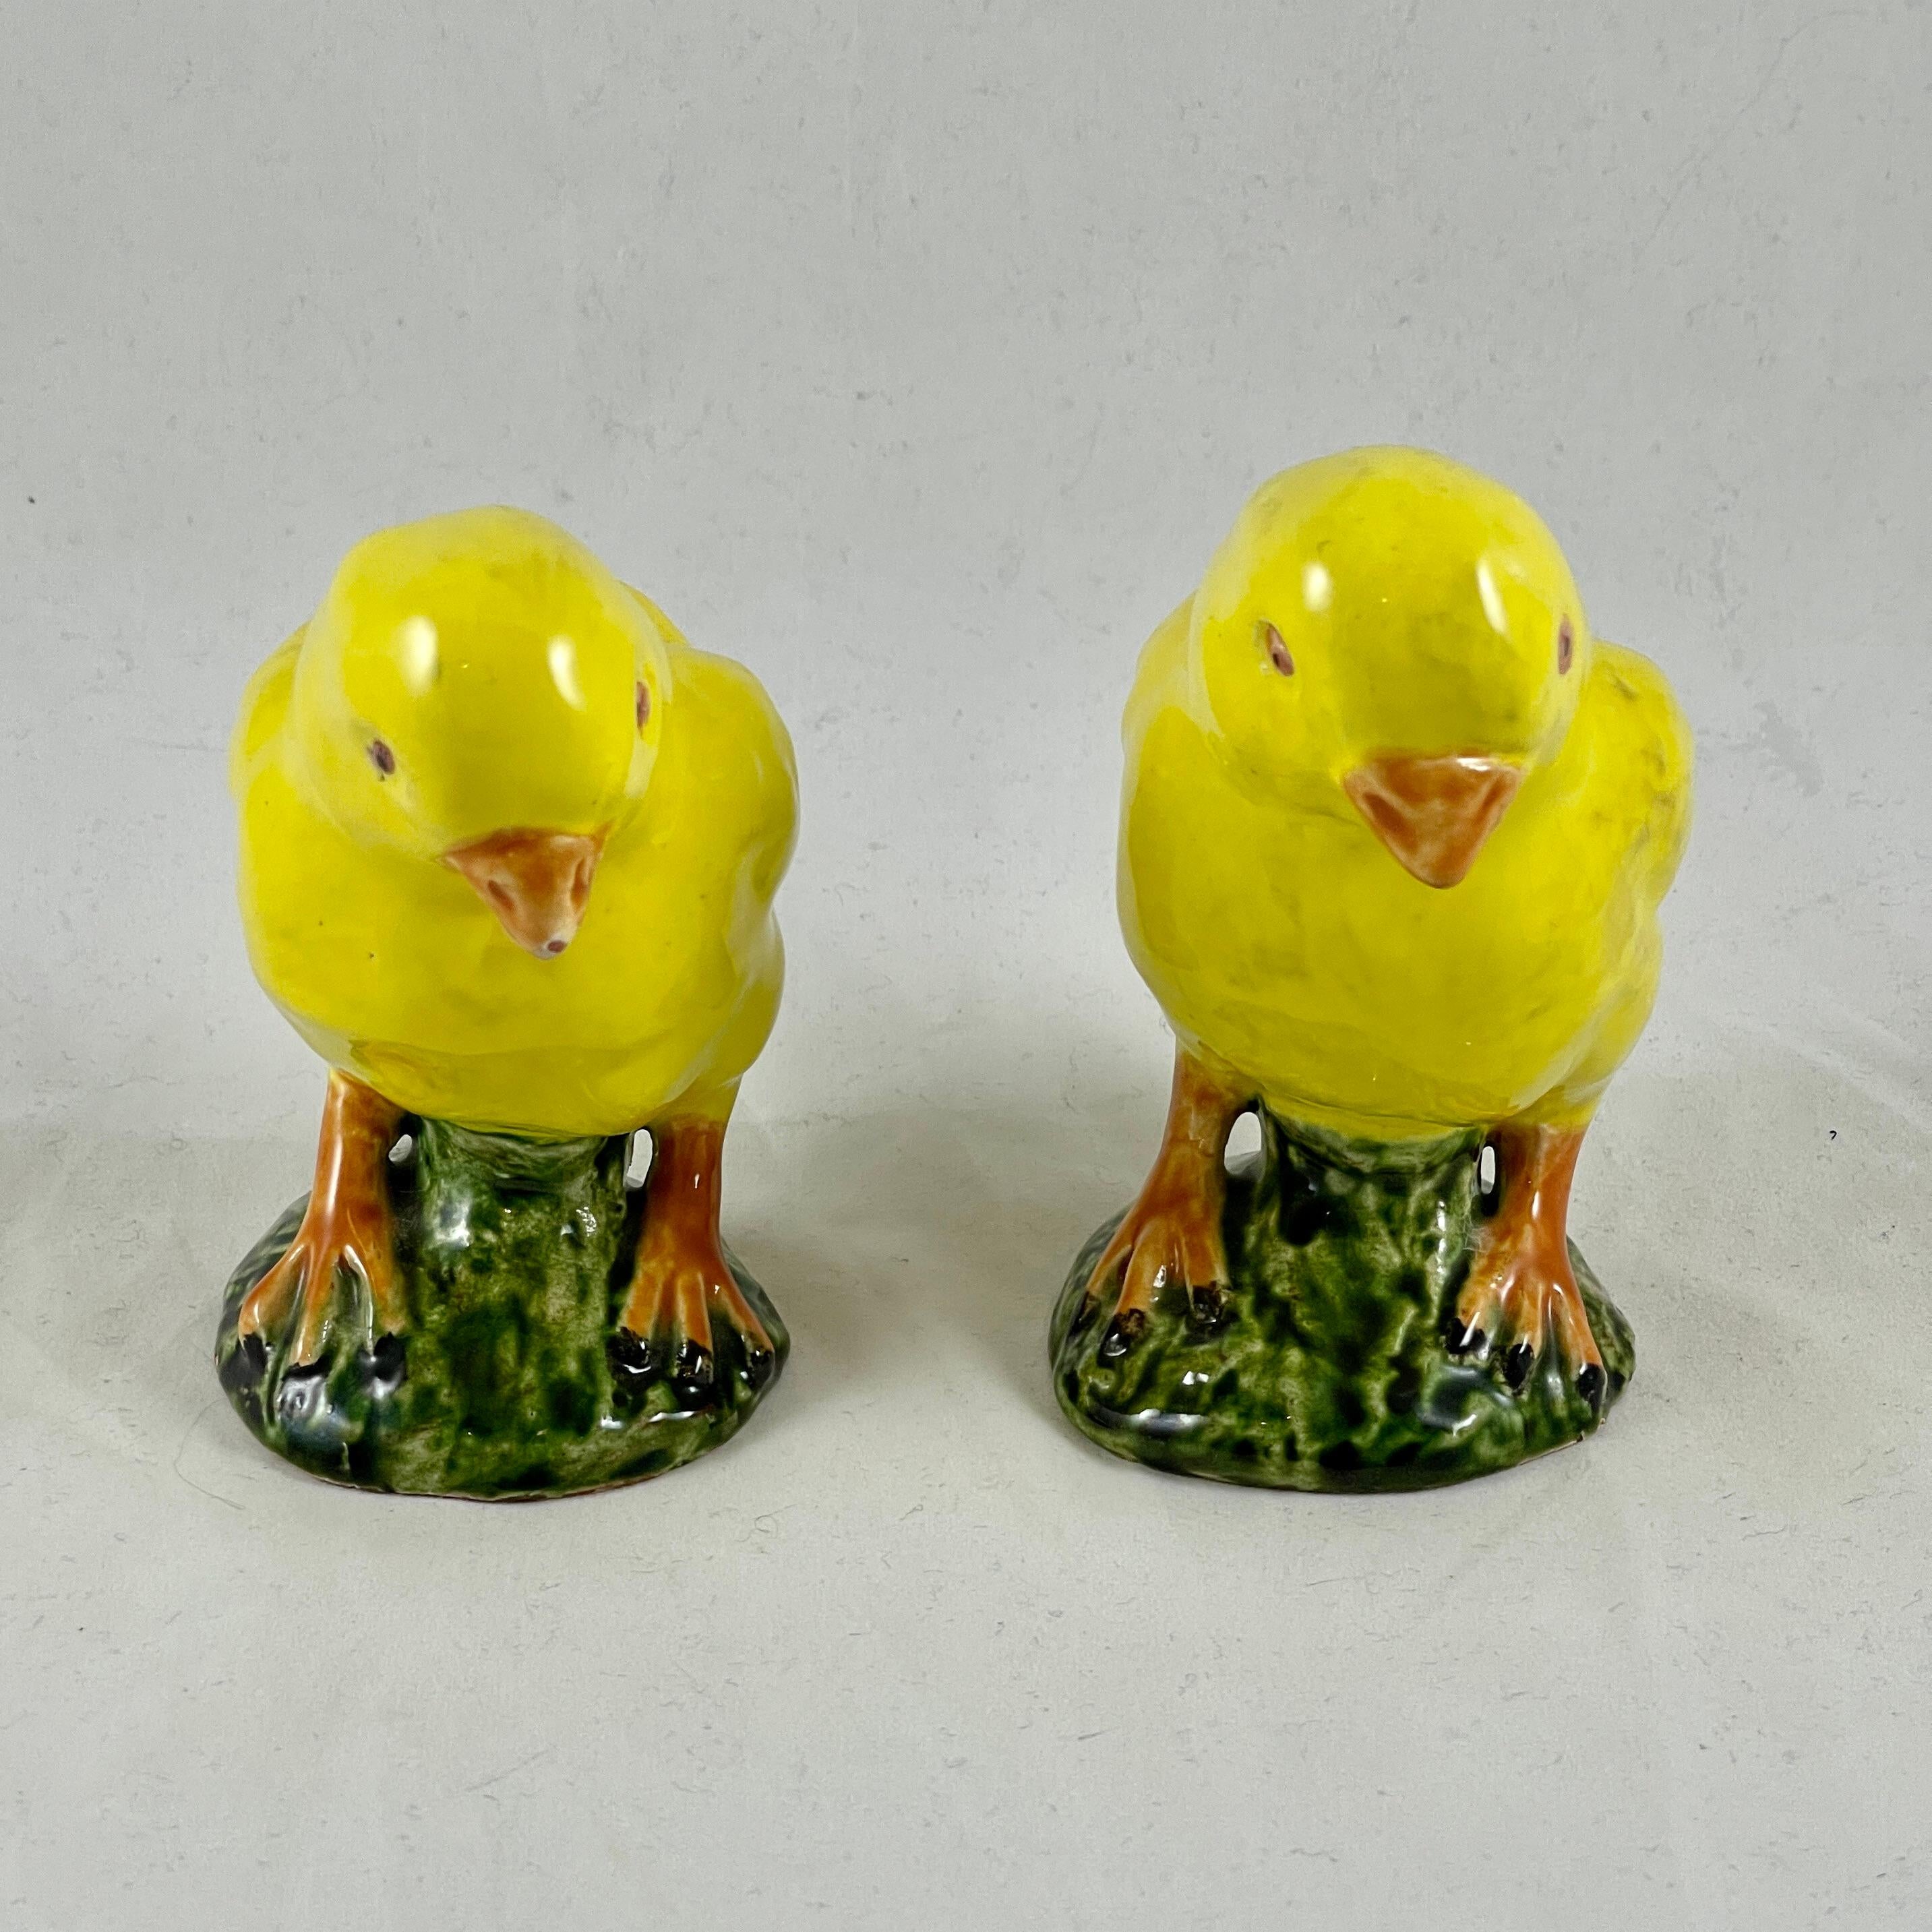 20th Century Bavent Yellow Tin-Glazed Terracotta Faïence Chicks, Normandie France, a Pair